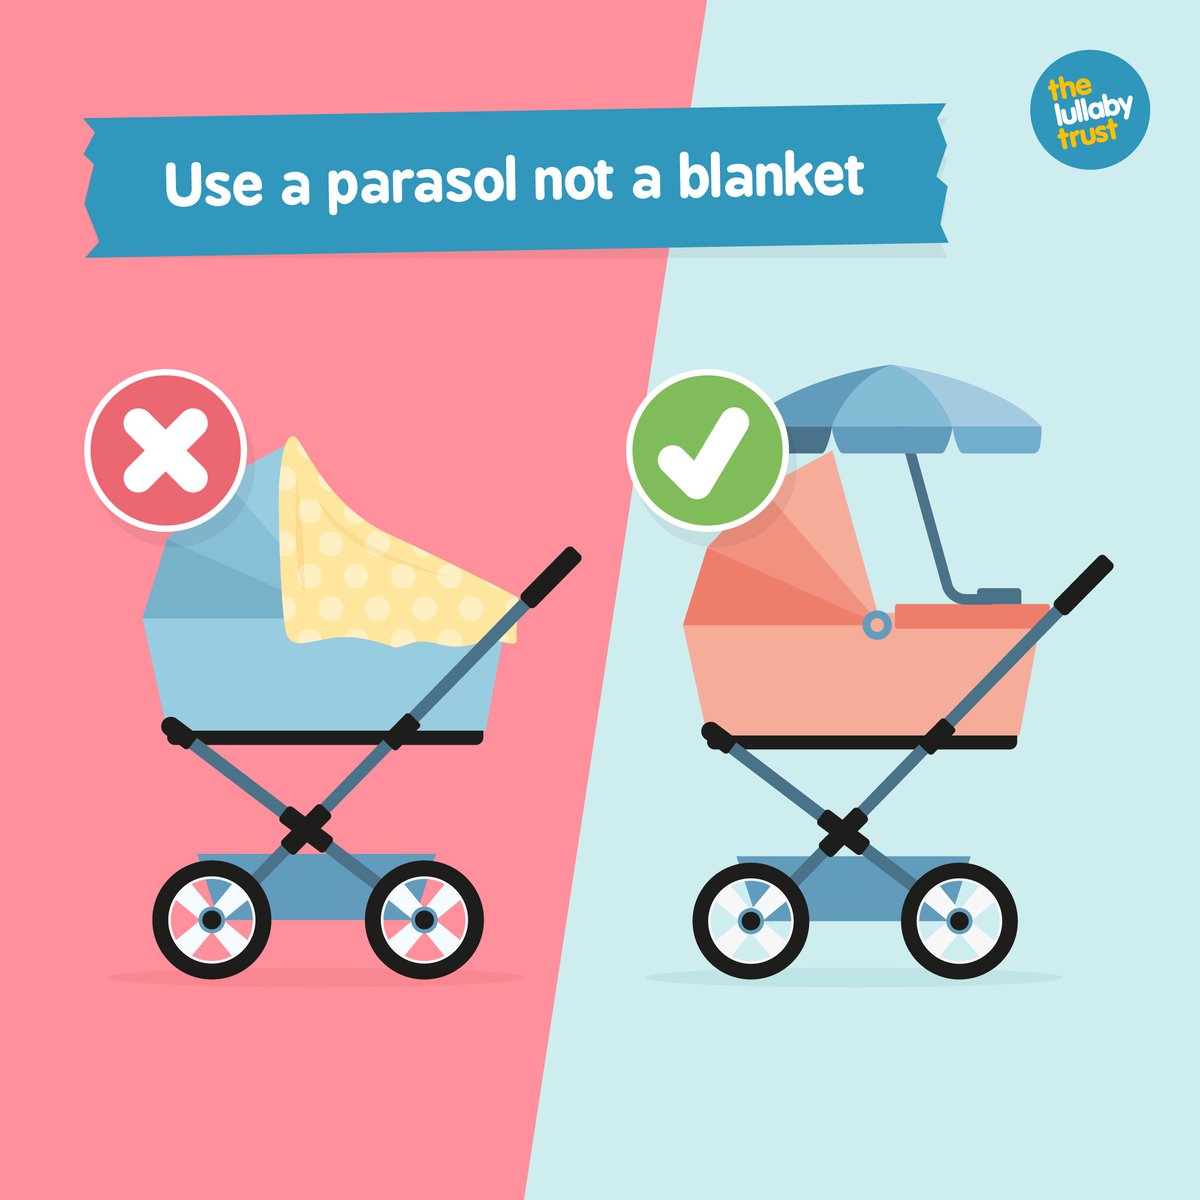 Whilst many parents will hang a blanket over their baby’s pram or buggy to protect them from the sun, we advise against it. This is because it reduces airflow around your baby and can cause overheating. Instead, we recommend using a clip-on sunshade or parasol.